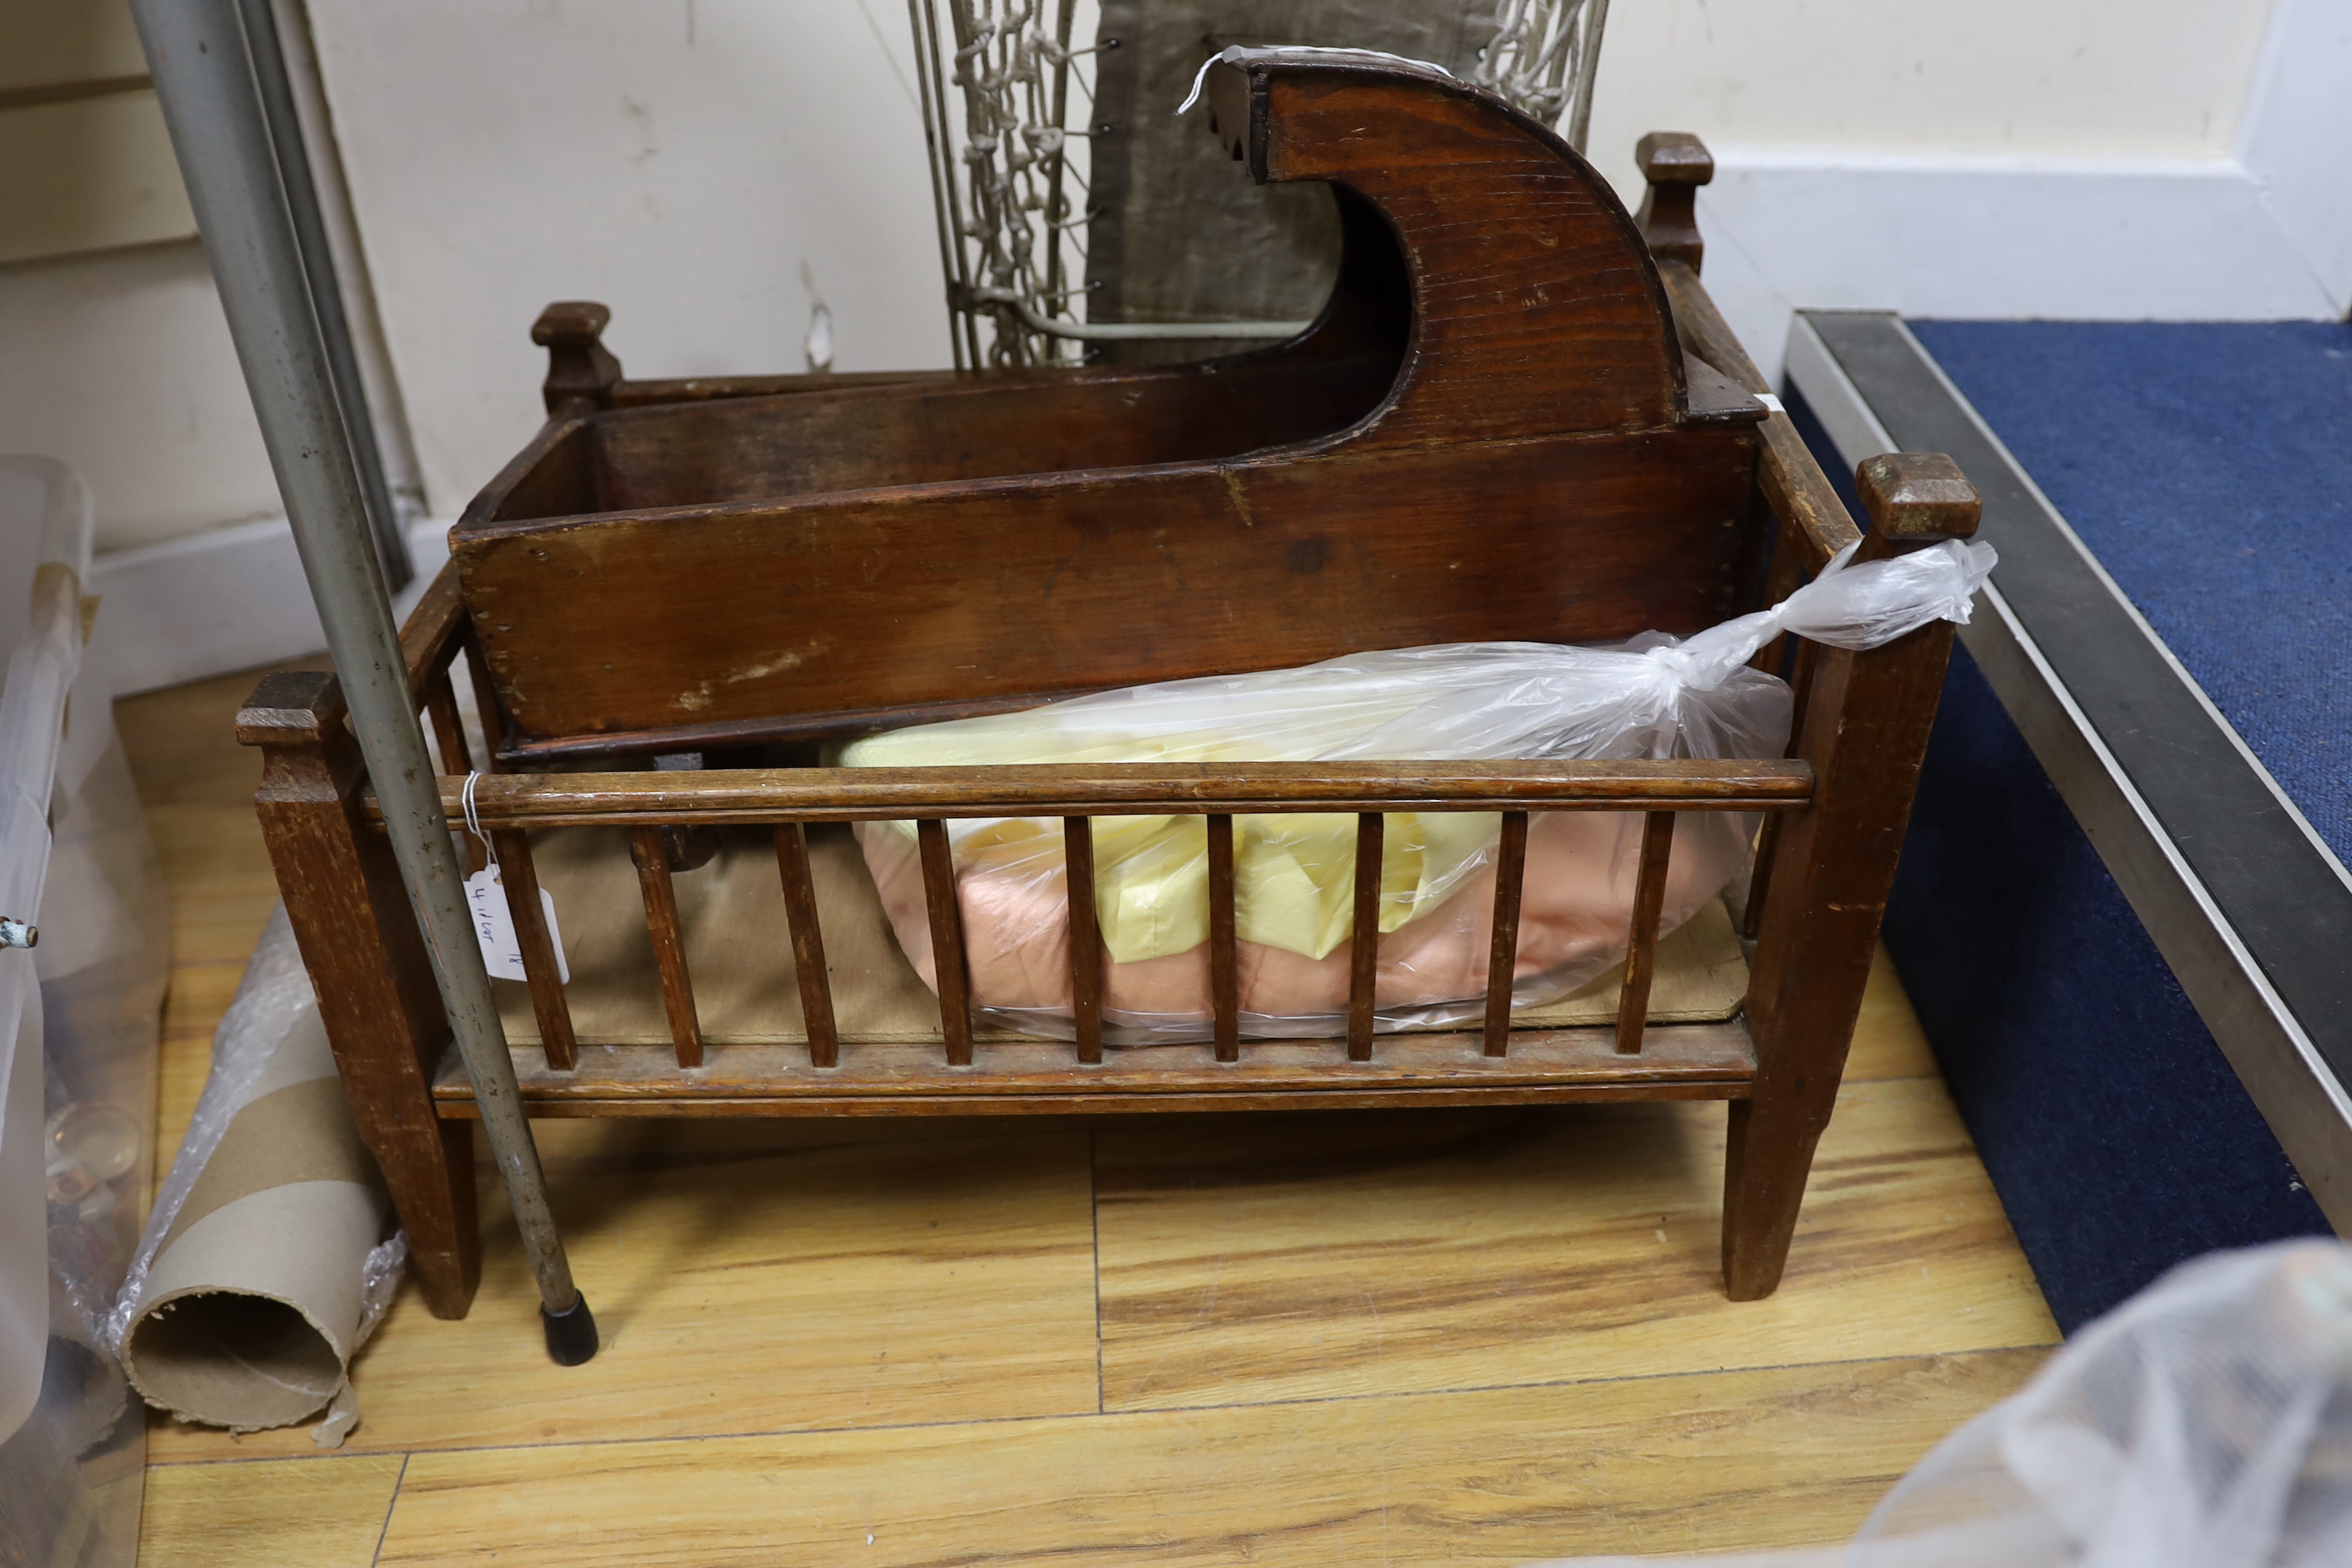 A mahogany crib, a doll's bed and bedding and a painted wooden rocking cradle and a Victorian cast iron crib